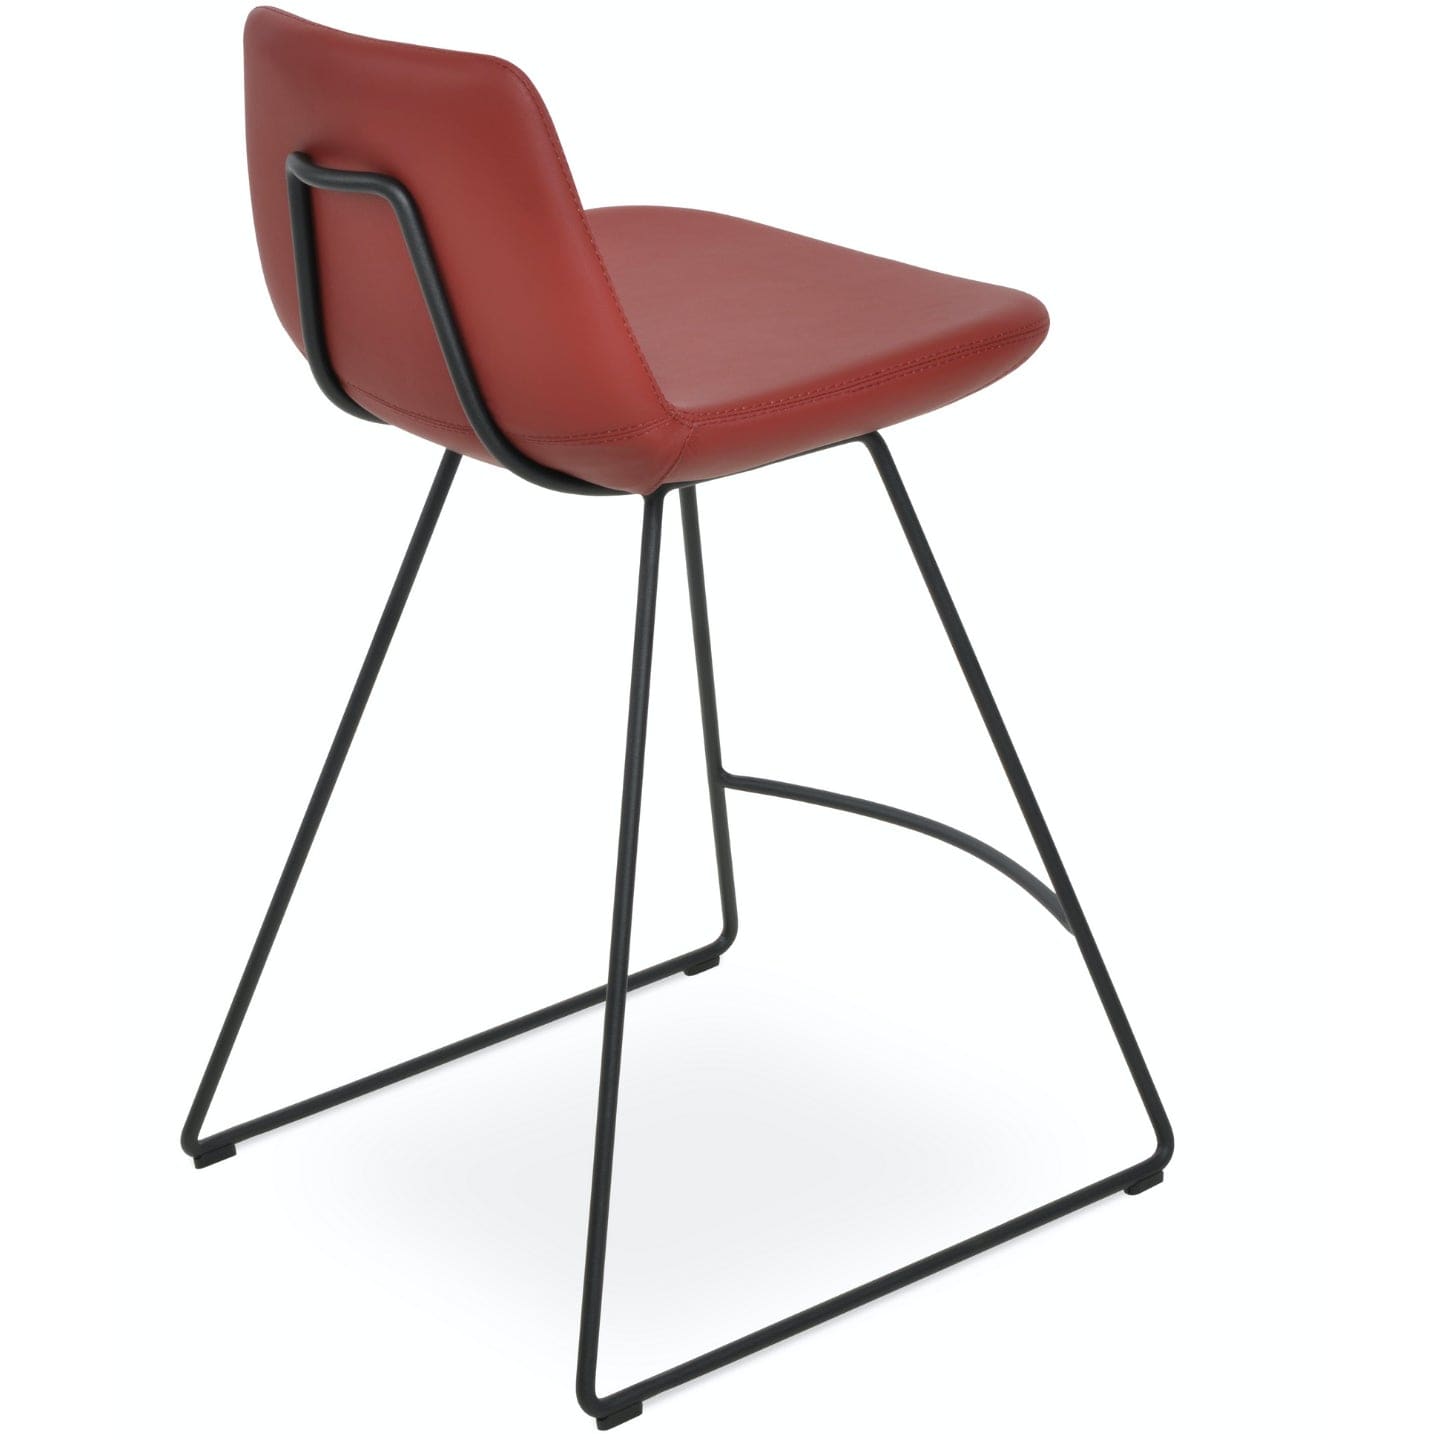 Soho Concept pera-wire-handle-back-black-metal-wire-base-faux-cuir-seat-kitchen-stool-in-dark-red